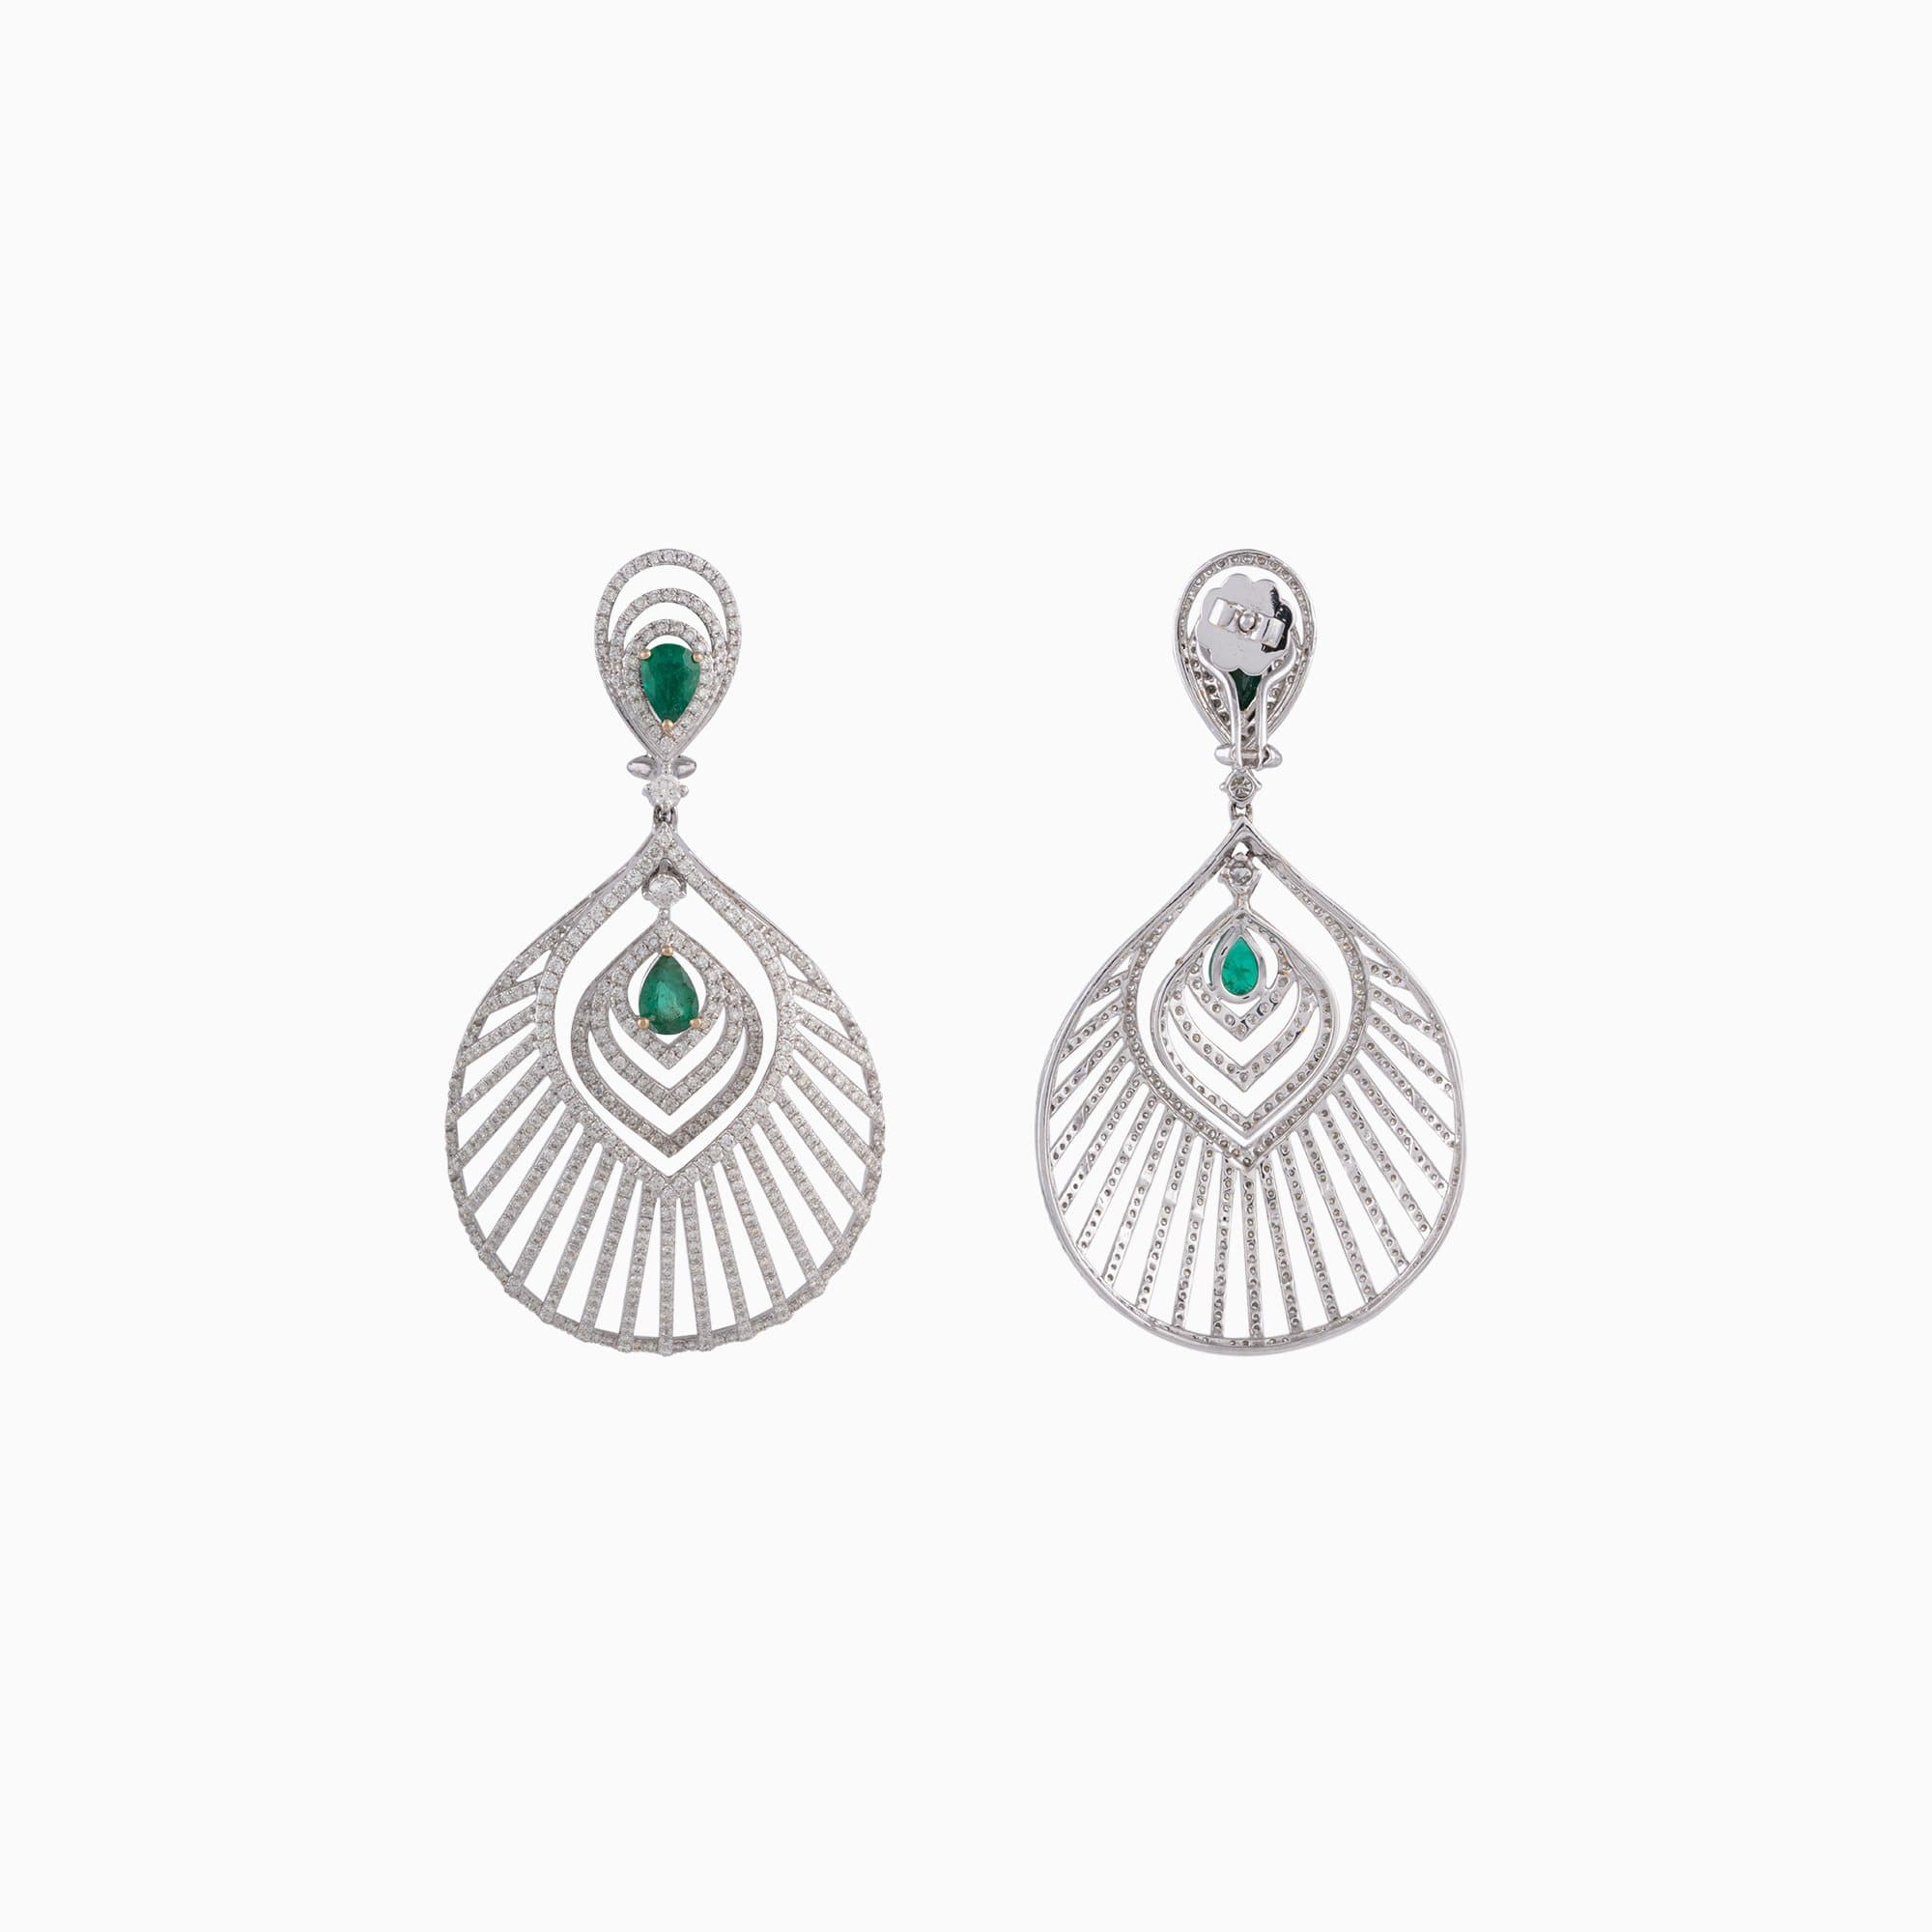 Earring Pair with Round Cut Diamond and Pear Cut Emerald - PGDE0134